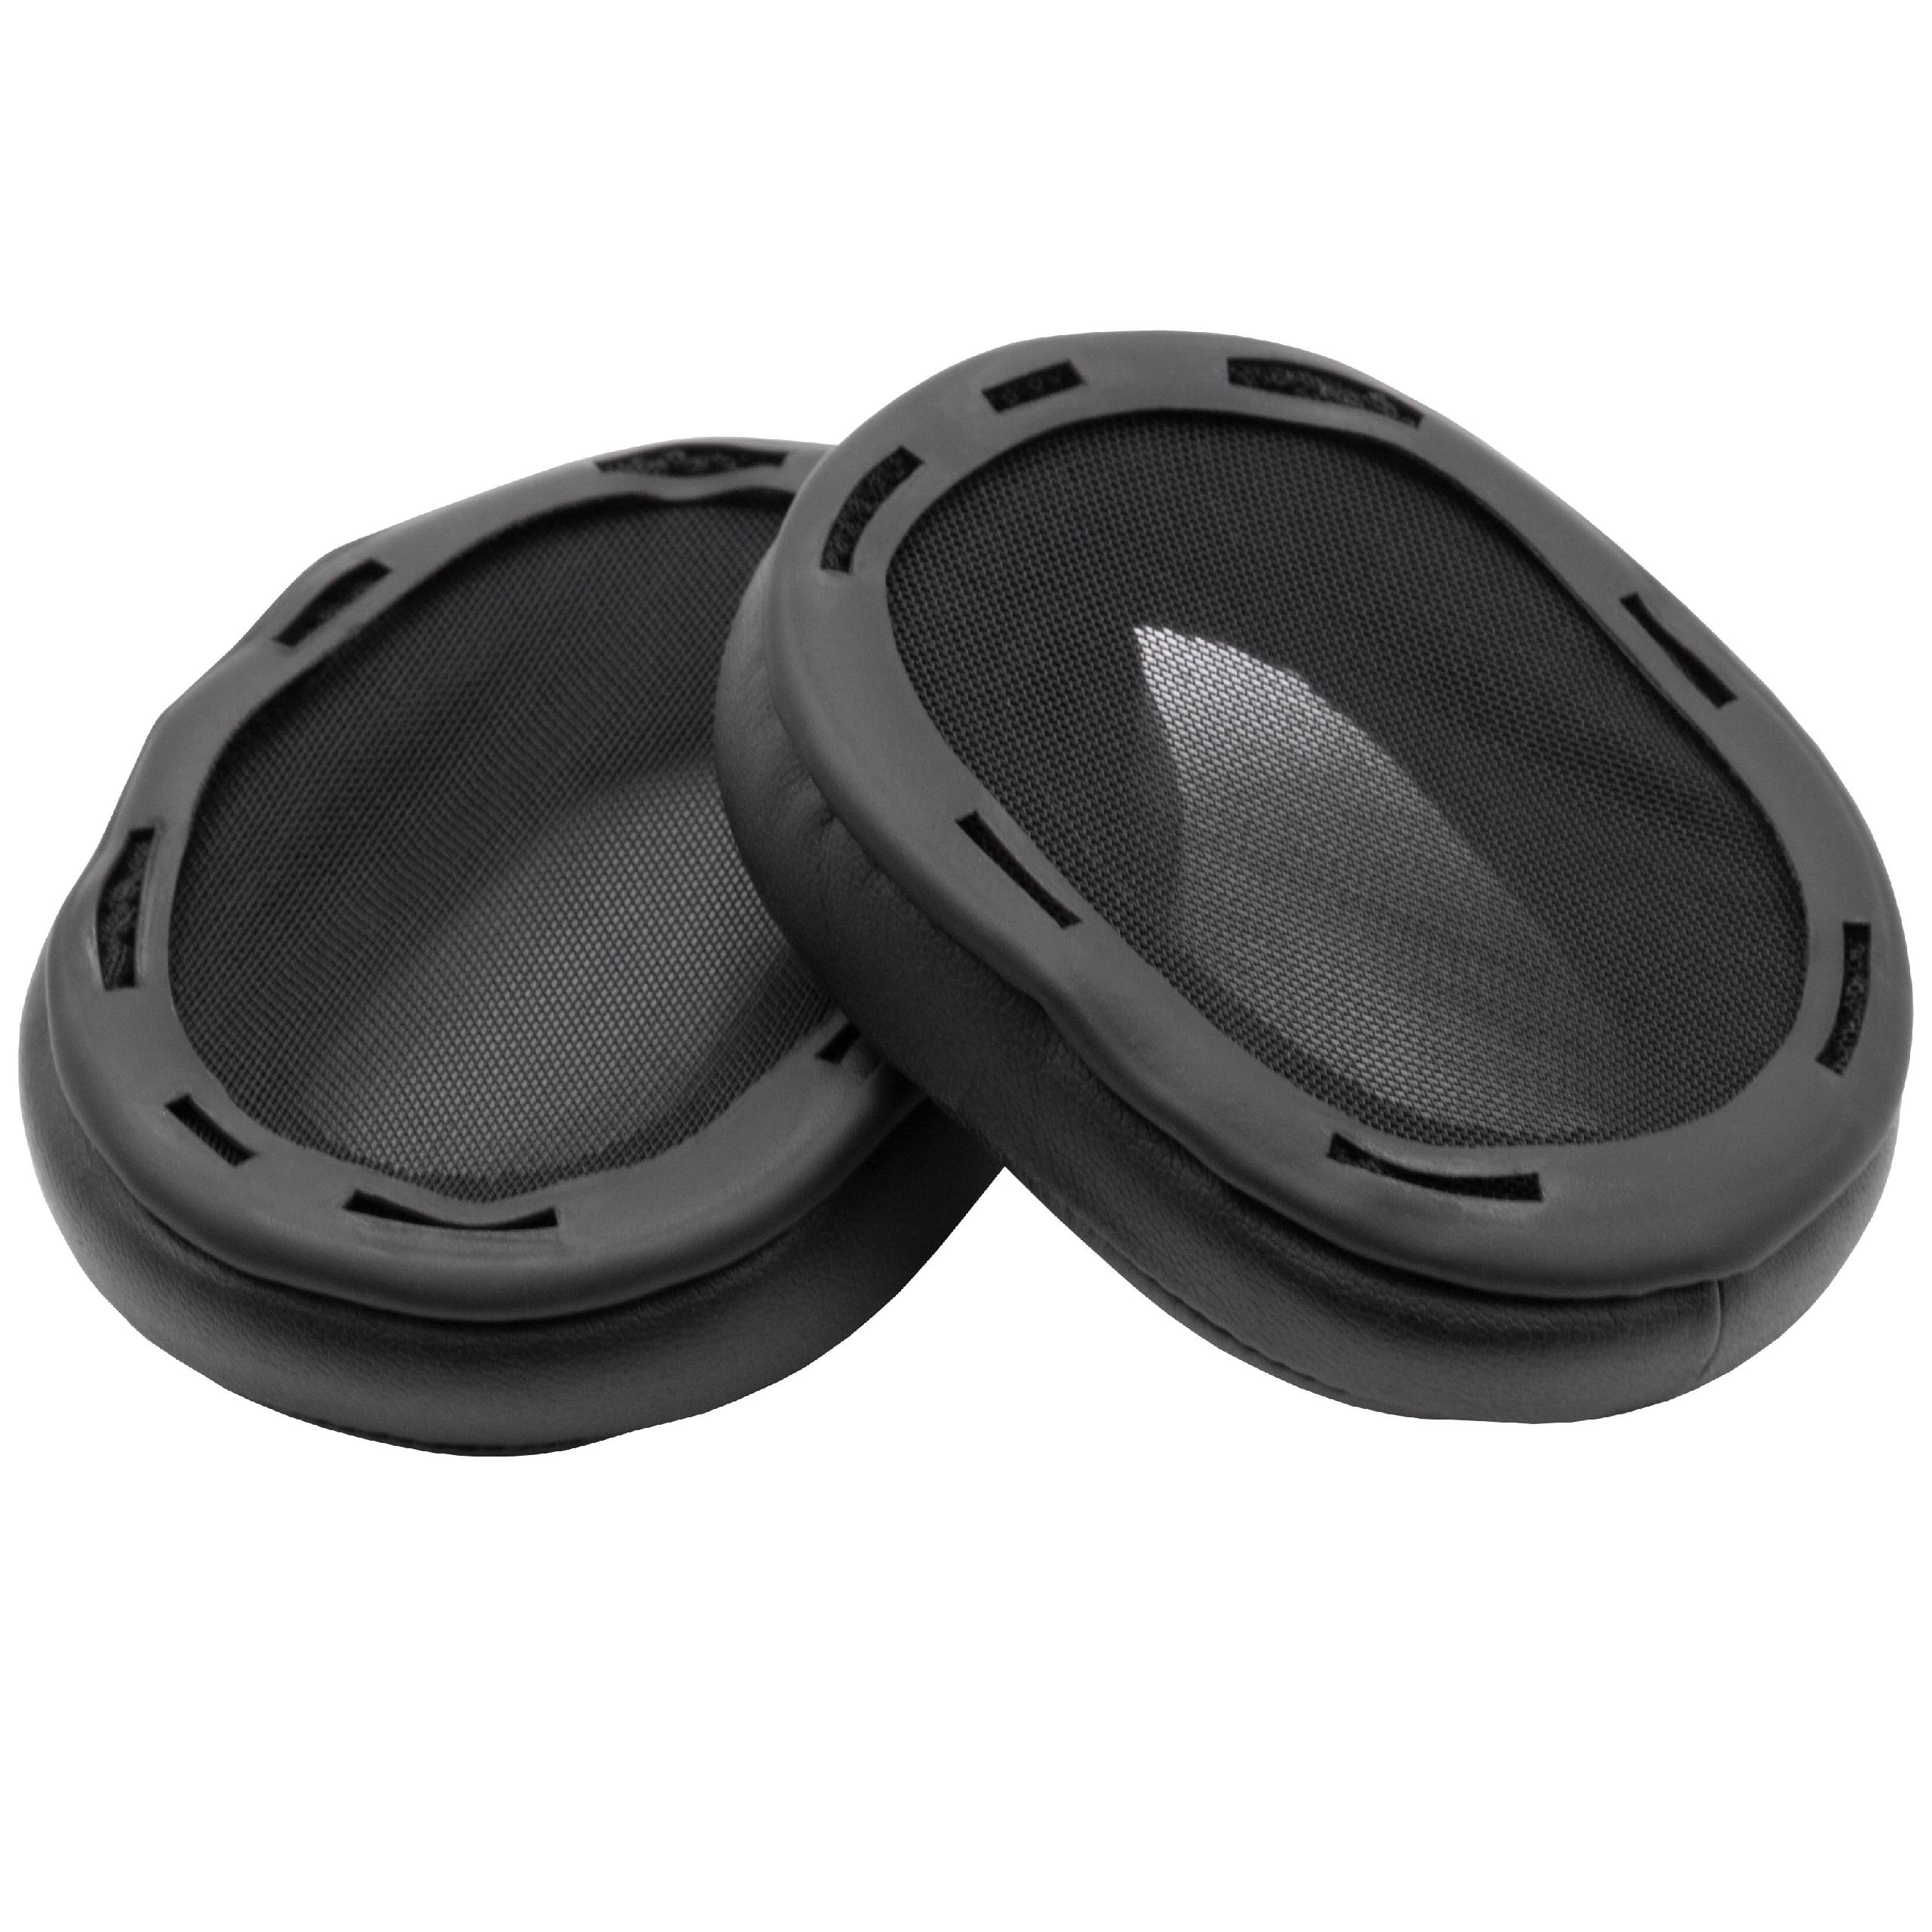 Ear Pads suitable for Sony MDR-1R Headphones etc. - polyurethane / foam, 17 mm thick